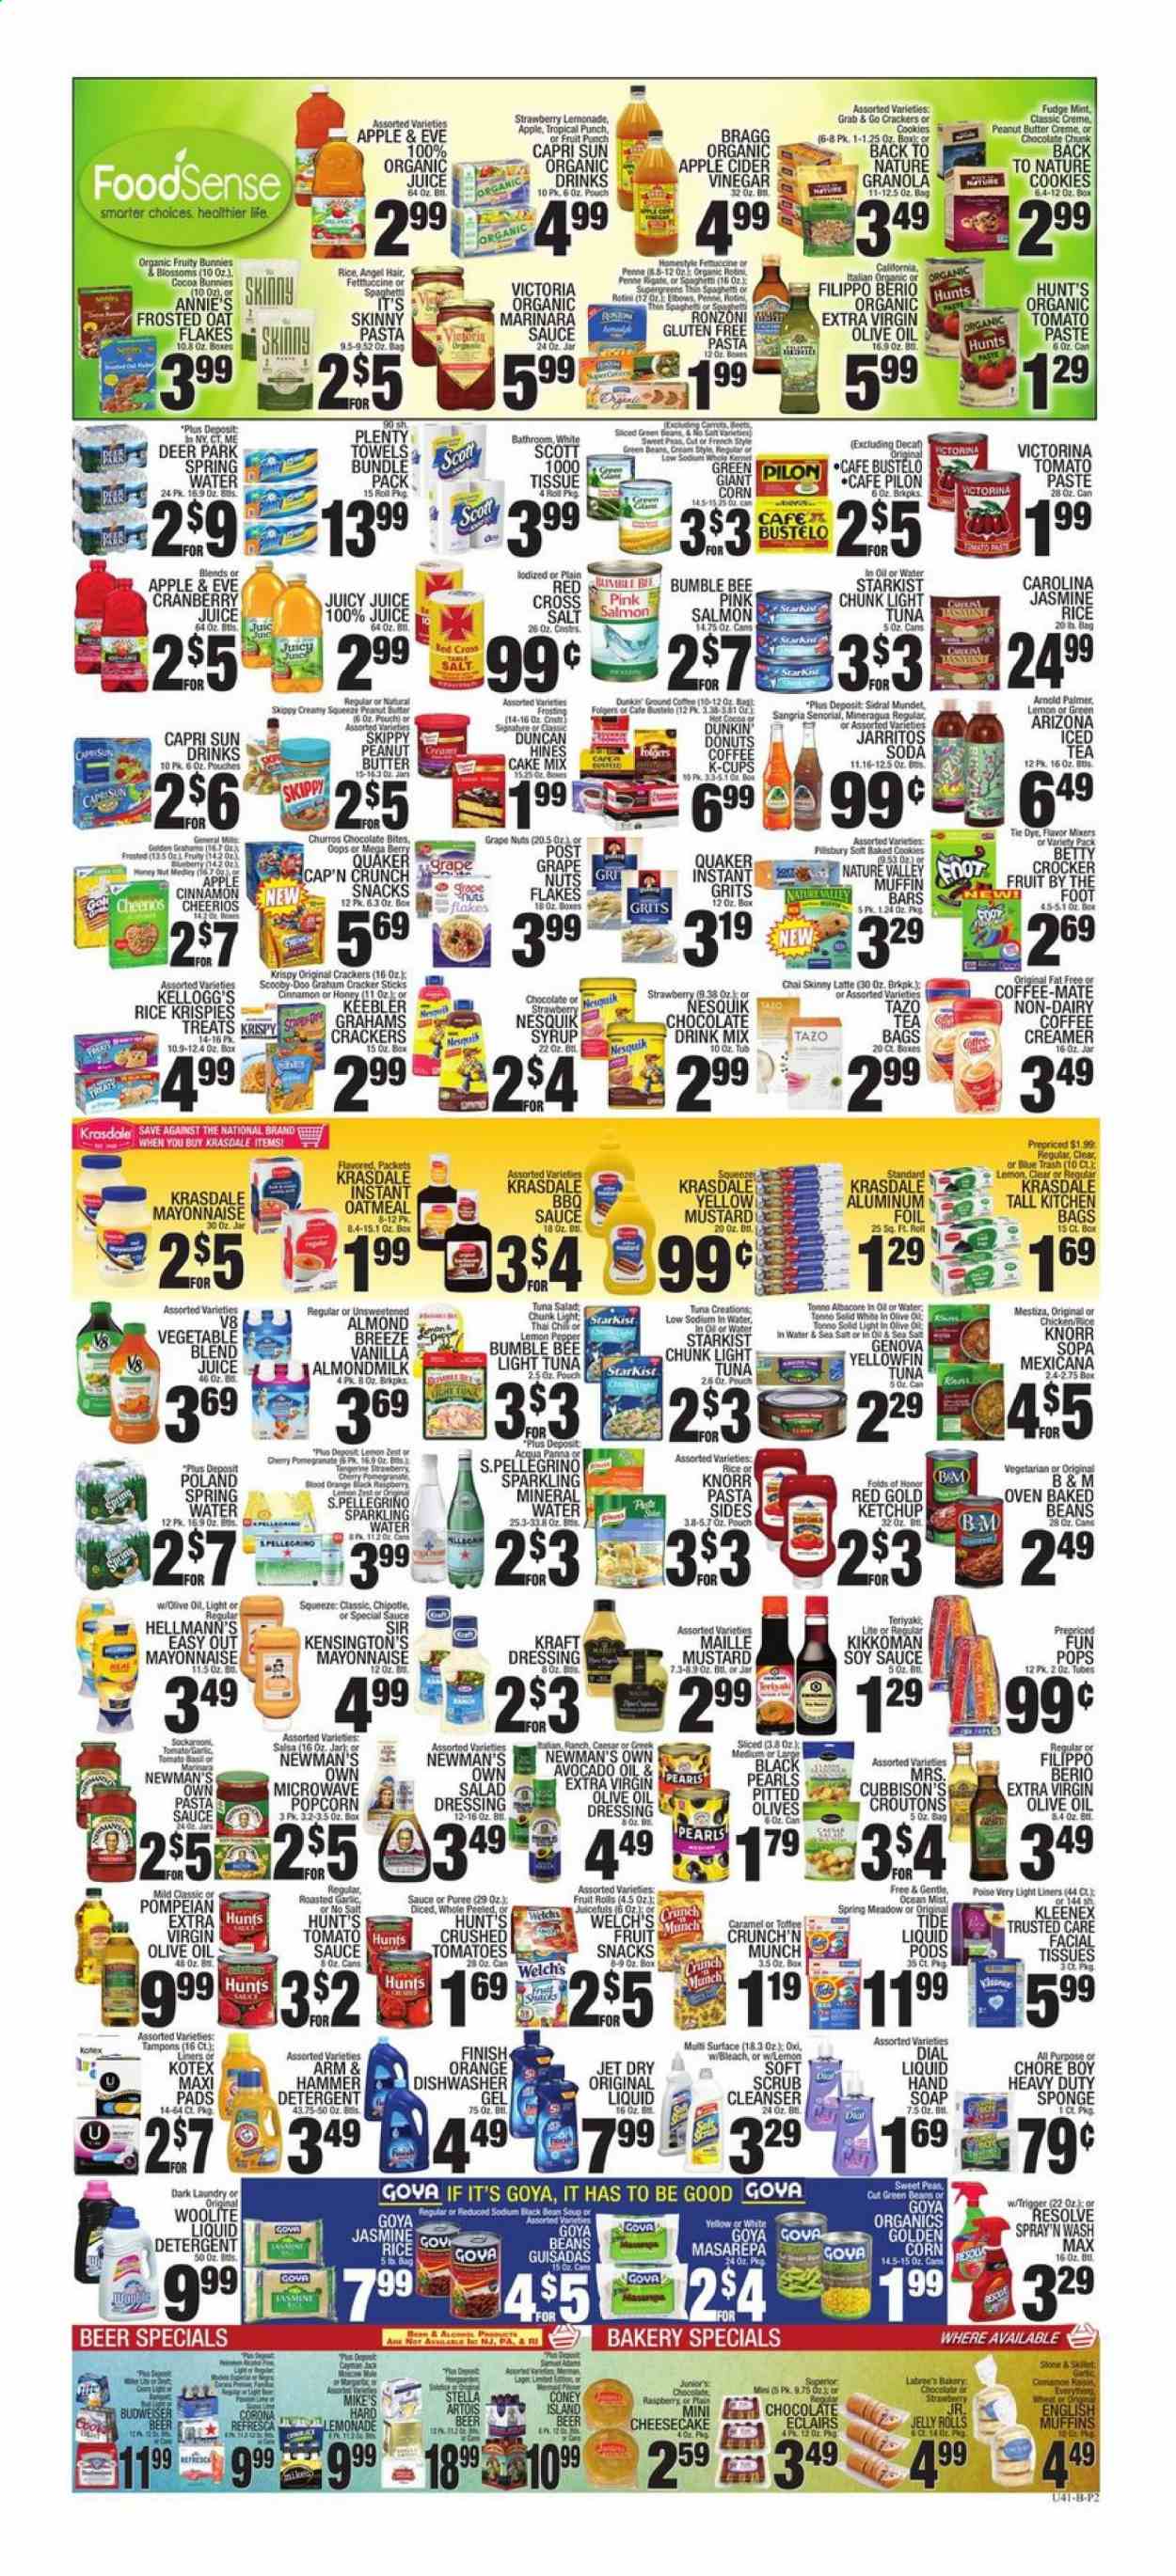 thumbnail - C-Town Flyer - 06/18/2021 - 06/24/2021 - Sales products - english muffins, cheesecake, dessert, éclairs, cake mix, corn, green beans, peas, snack, Welch's, salmon, StarKist, pasta sauce, soup, Bumble Bee, Knorr, sauce, Quaker, Annie's, pasta sides, Kraft®, ready meal, tuna salad, Nesquik, snack bar, almond milk, Coffee-Mate, Almond Breeze, creamer, coffee and tea creamer, mayonnaise, Hellmann’s, crackers, Kellogg's, fruit snack, Keebler, fruit rolls, bars, popcorn, ARM & HAMMER, croutons, frosting, oatmeal, oats, grits, baking mix, canned tuna, crushed tomatoes, tomato paste, light tuna, baked beans, Goya, canned fish, crispy rice bar, granola, Cheerios, churros, Cap'n Crunch, Nature Valley, penne, mint, BBQ sauce, mustard, salad dressing, soy sauce, ketchup, Kikkoman, salsa, apple cider vinegar, avocado oil, extra virgin olive oil, vinegar, olive oil, Capri Sun, lemonade, fruit drink, AriZona, fruit punch, mineral water, spring water, soda, sparkling water, San Pellegrino, chocolate drink, tea bags, Folgers, ground coffee, coffee capsules, K-Cups, beer, Budweiser, Stella Artois, Corona Extra. Page 2.